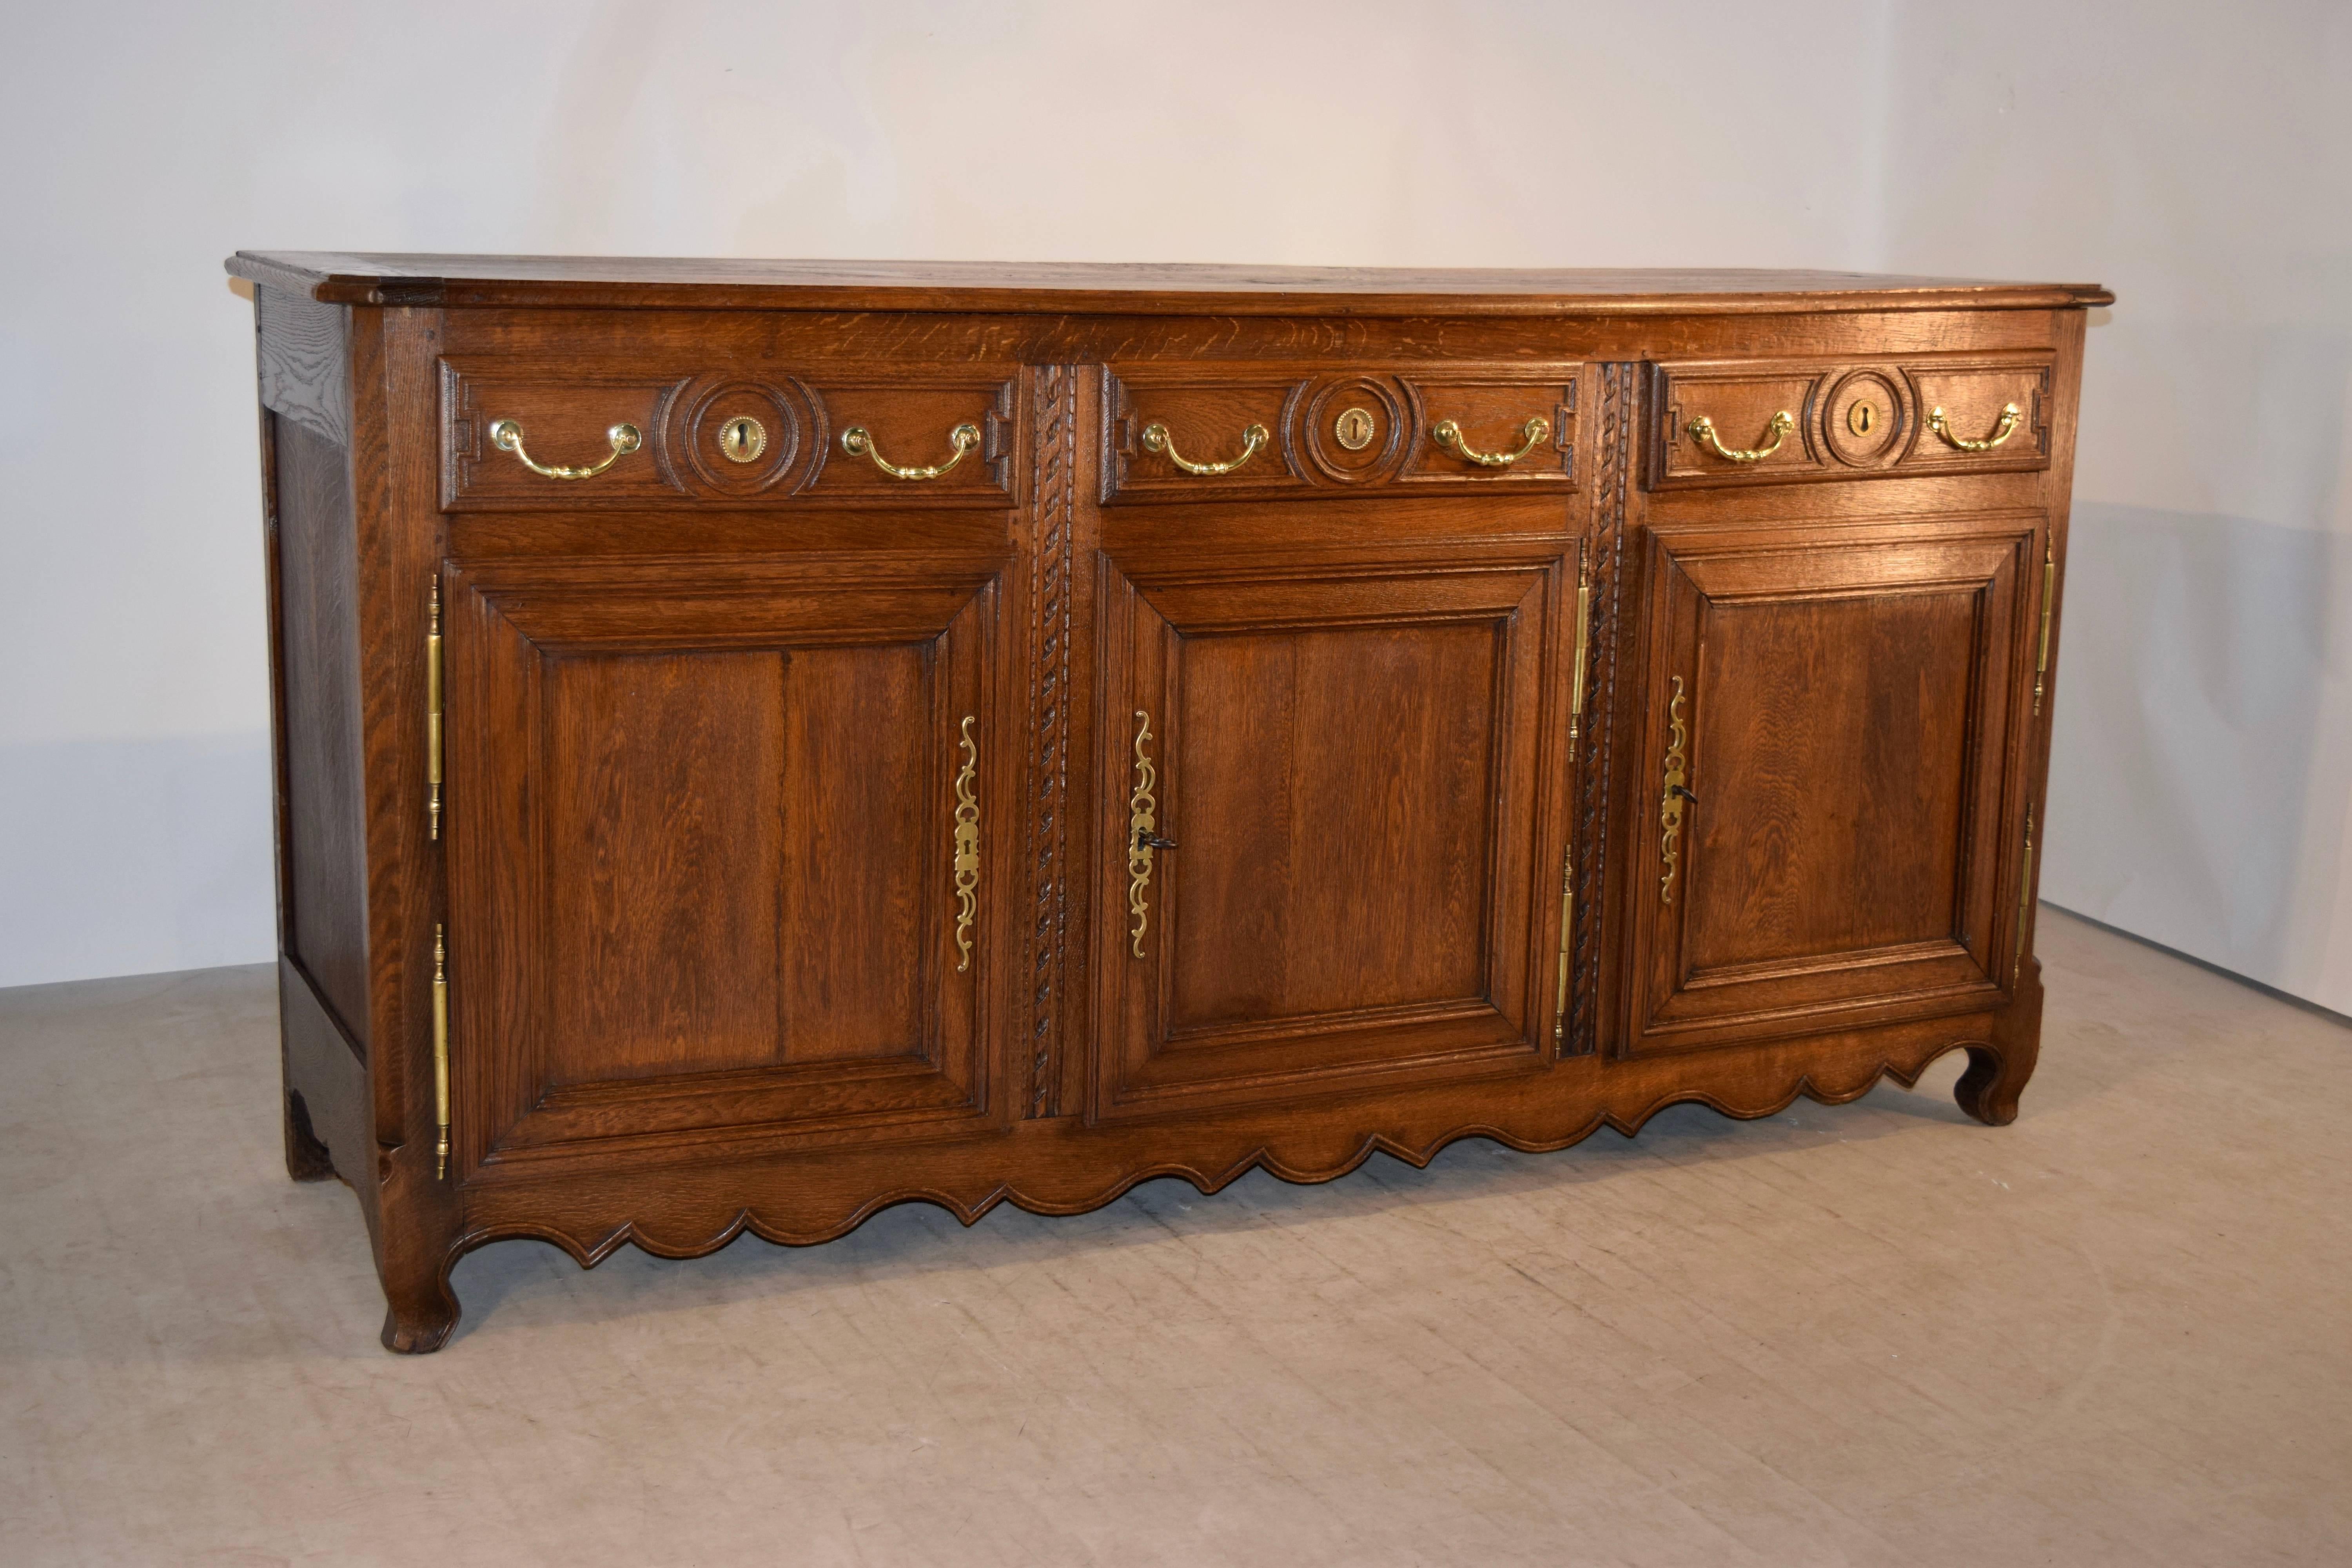 18th century oak enfilade from France. The top is made of three boards, and has banded ends and a beveled edge, following down to paneled sides and three drawers over three doors in the front, which open to reveal storage. The drawer fronts and